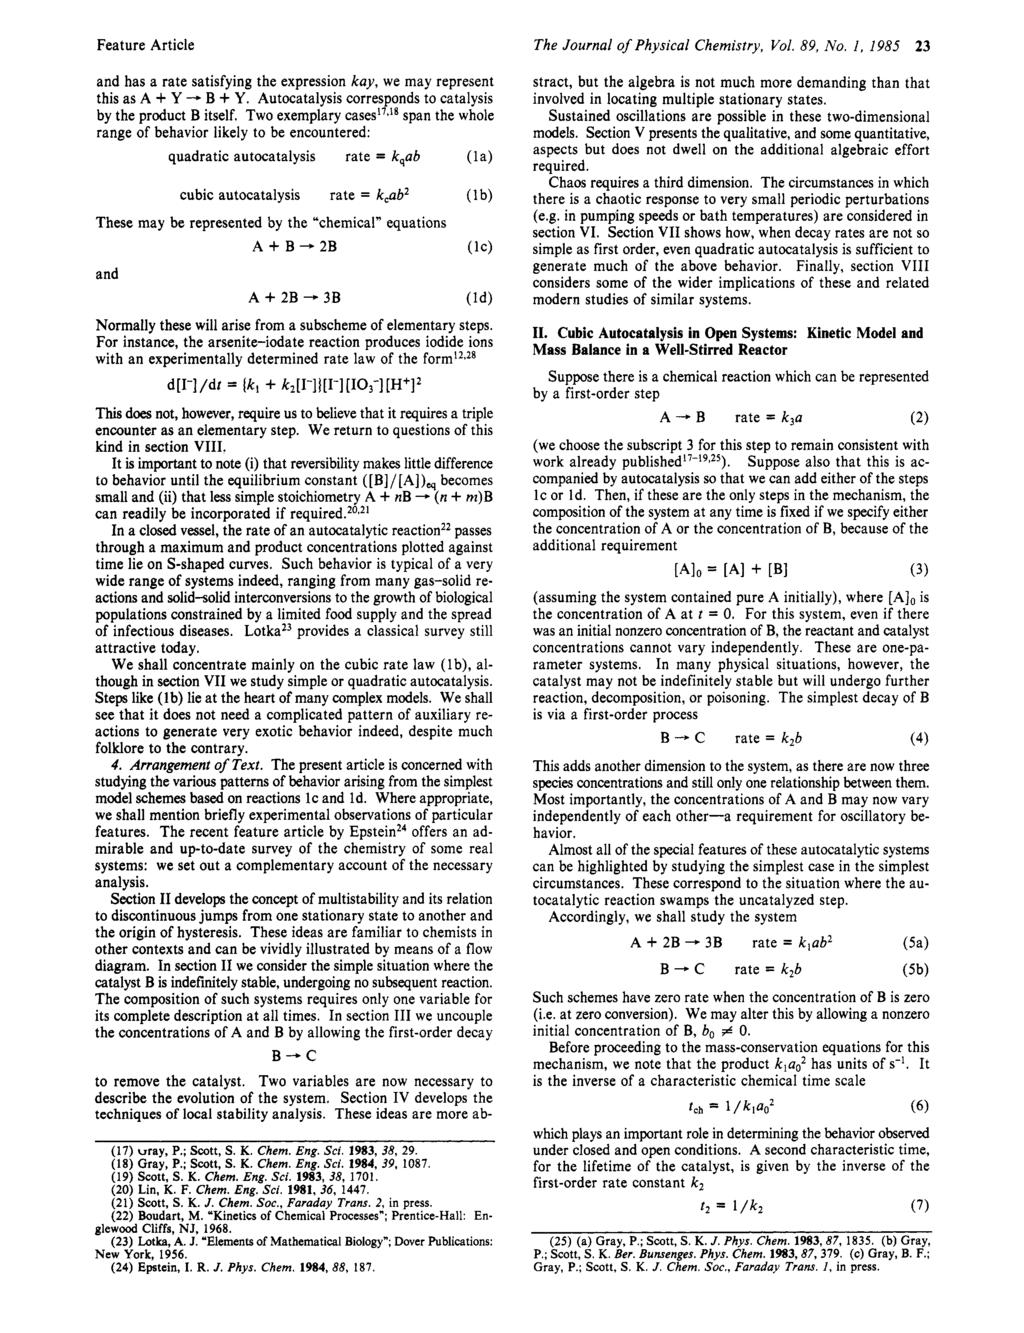 C Feature Article The Journal of Physical Chemistry, Vol. 89, No. 1, 1985 23 and has a rate satisfying the expression kay, we may represent this as A + Y - B + Y.